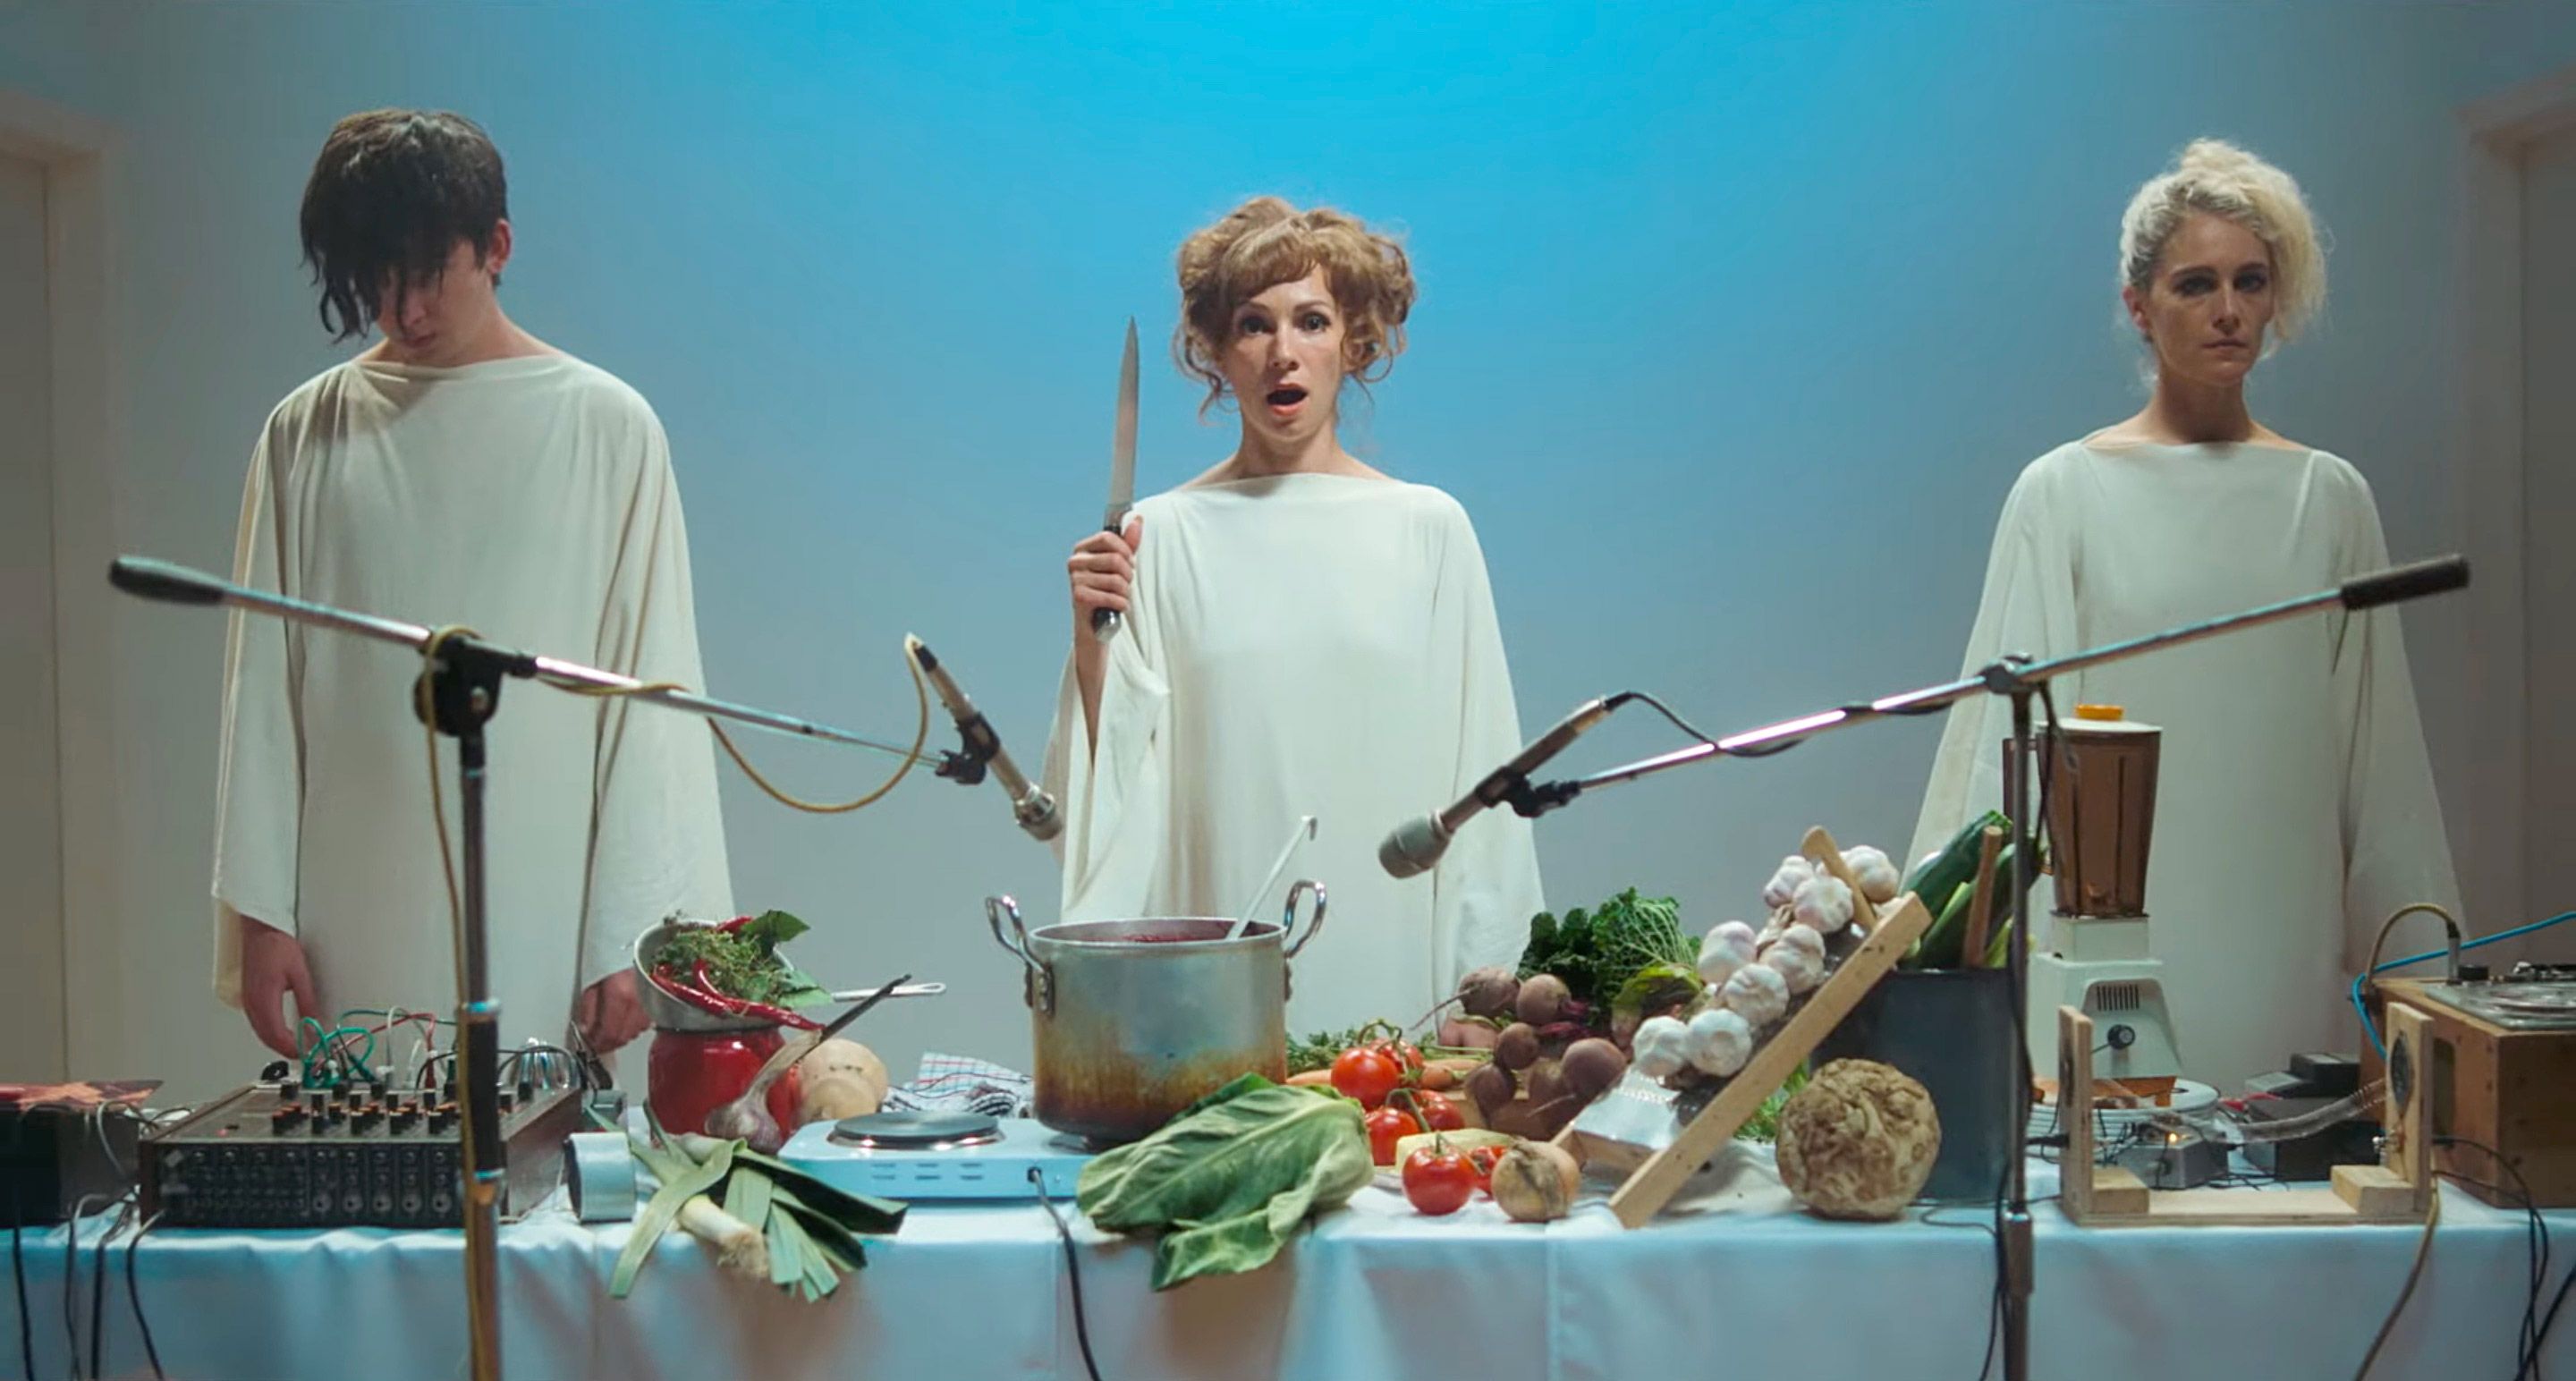 Peter Strickland on the Making of 'Flux Gourmet'